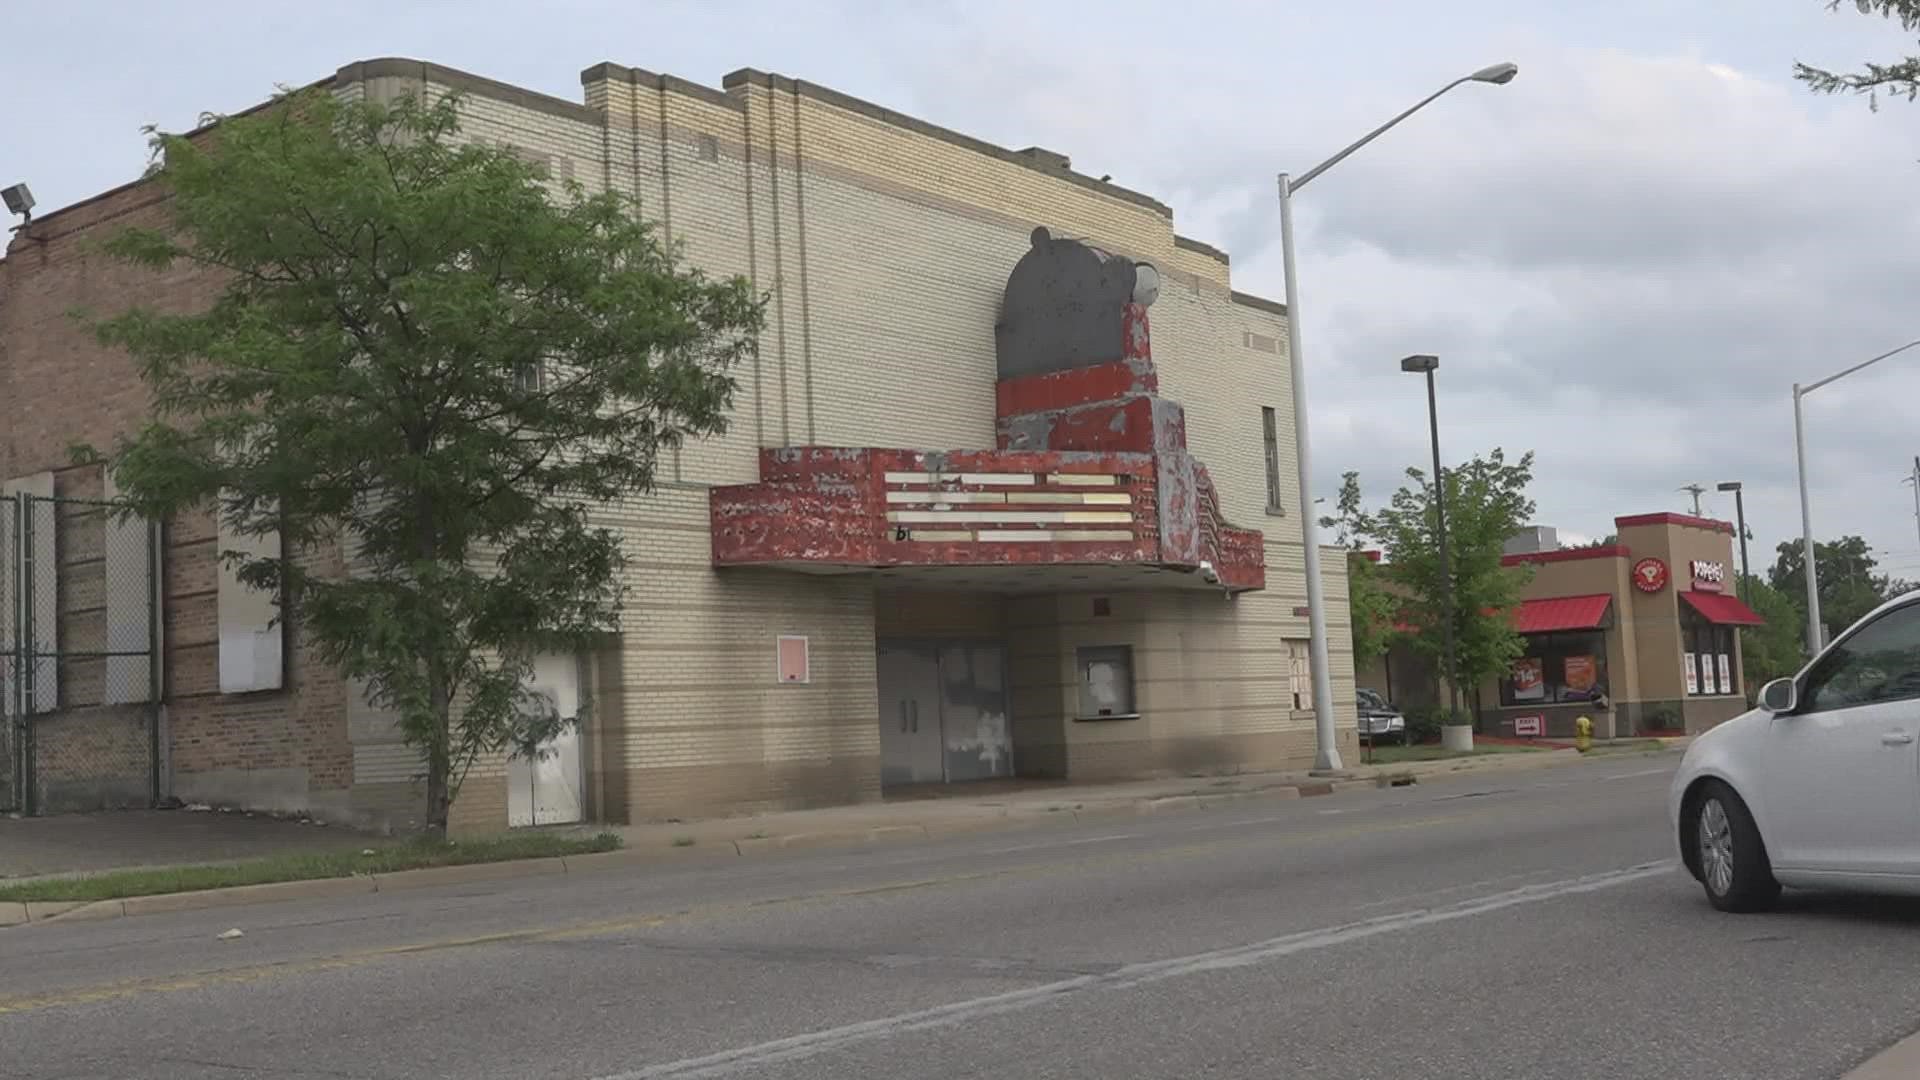 The Four Star Theater was built in 1938 on Division Avenue, but hasn't been used in more than a decade. That could soon change.